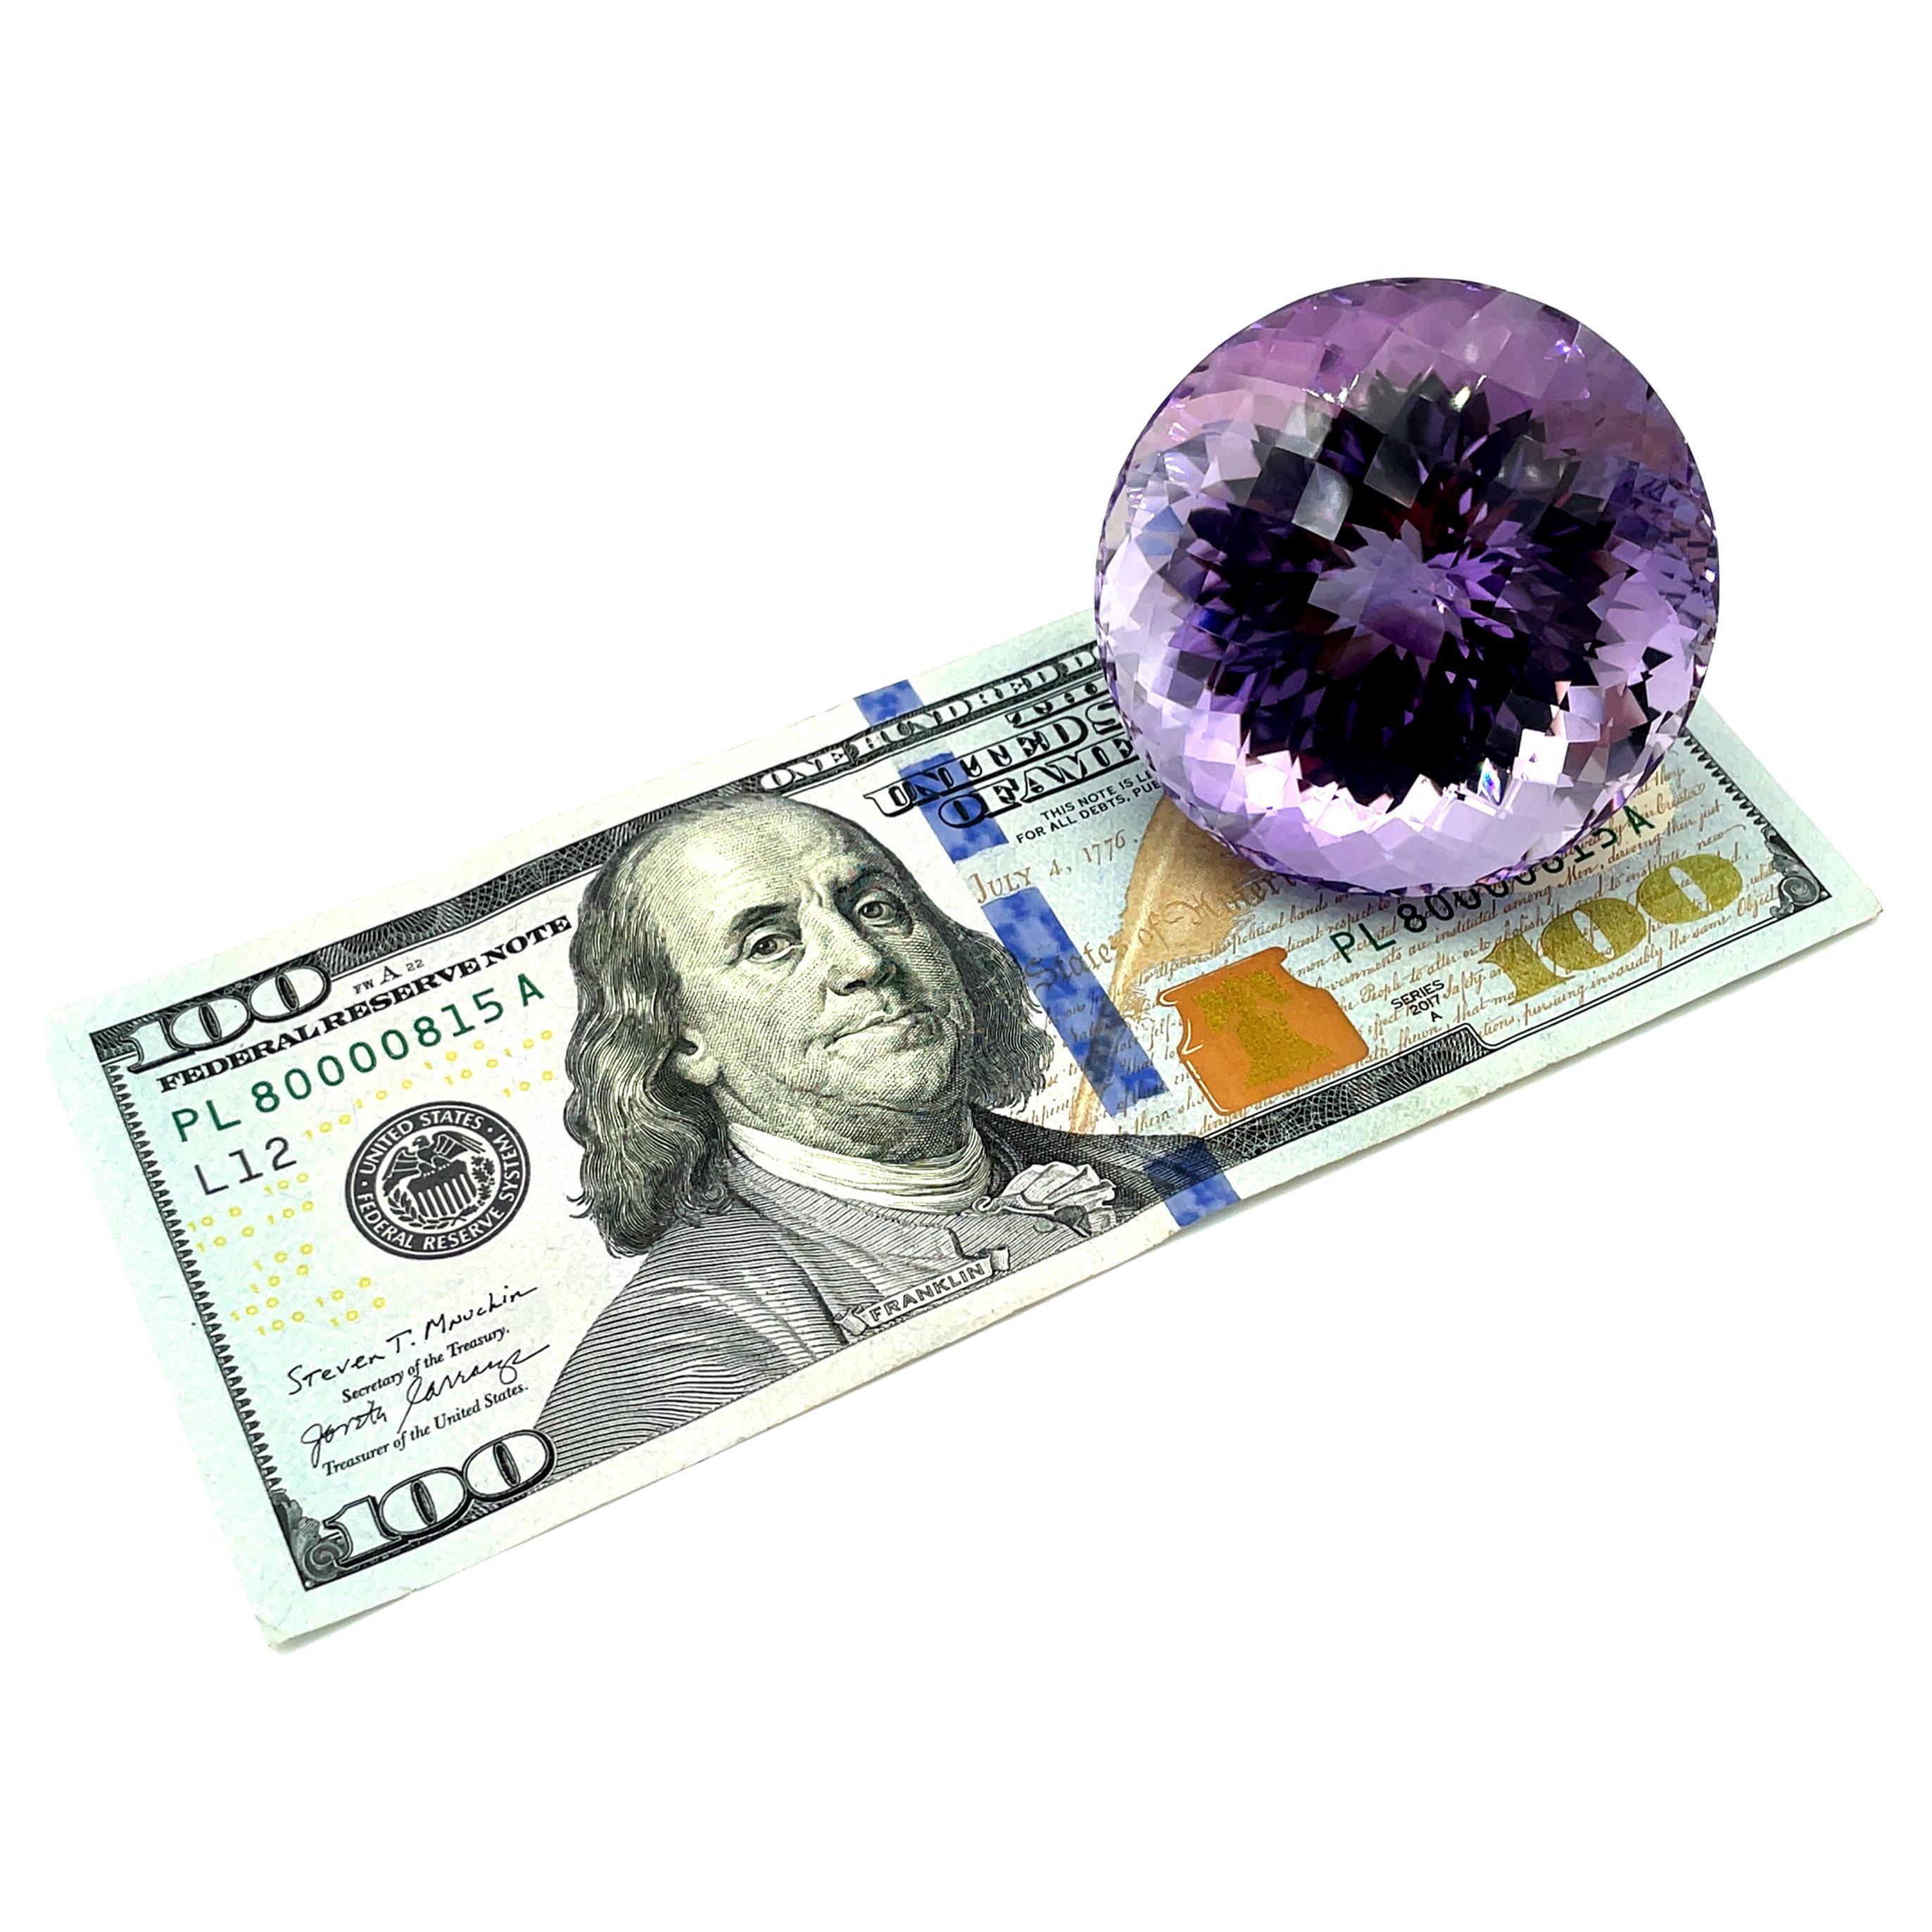 651 Carat Round Faceted Checkerboard Amethyst Collector Gemstone  For Sale